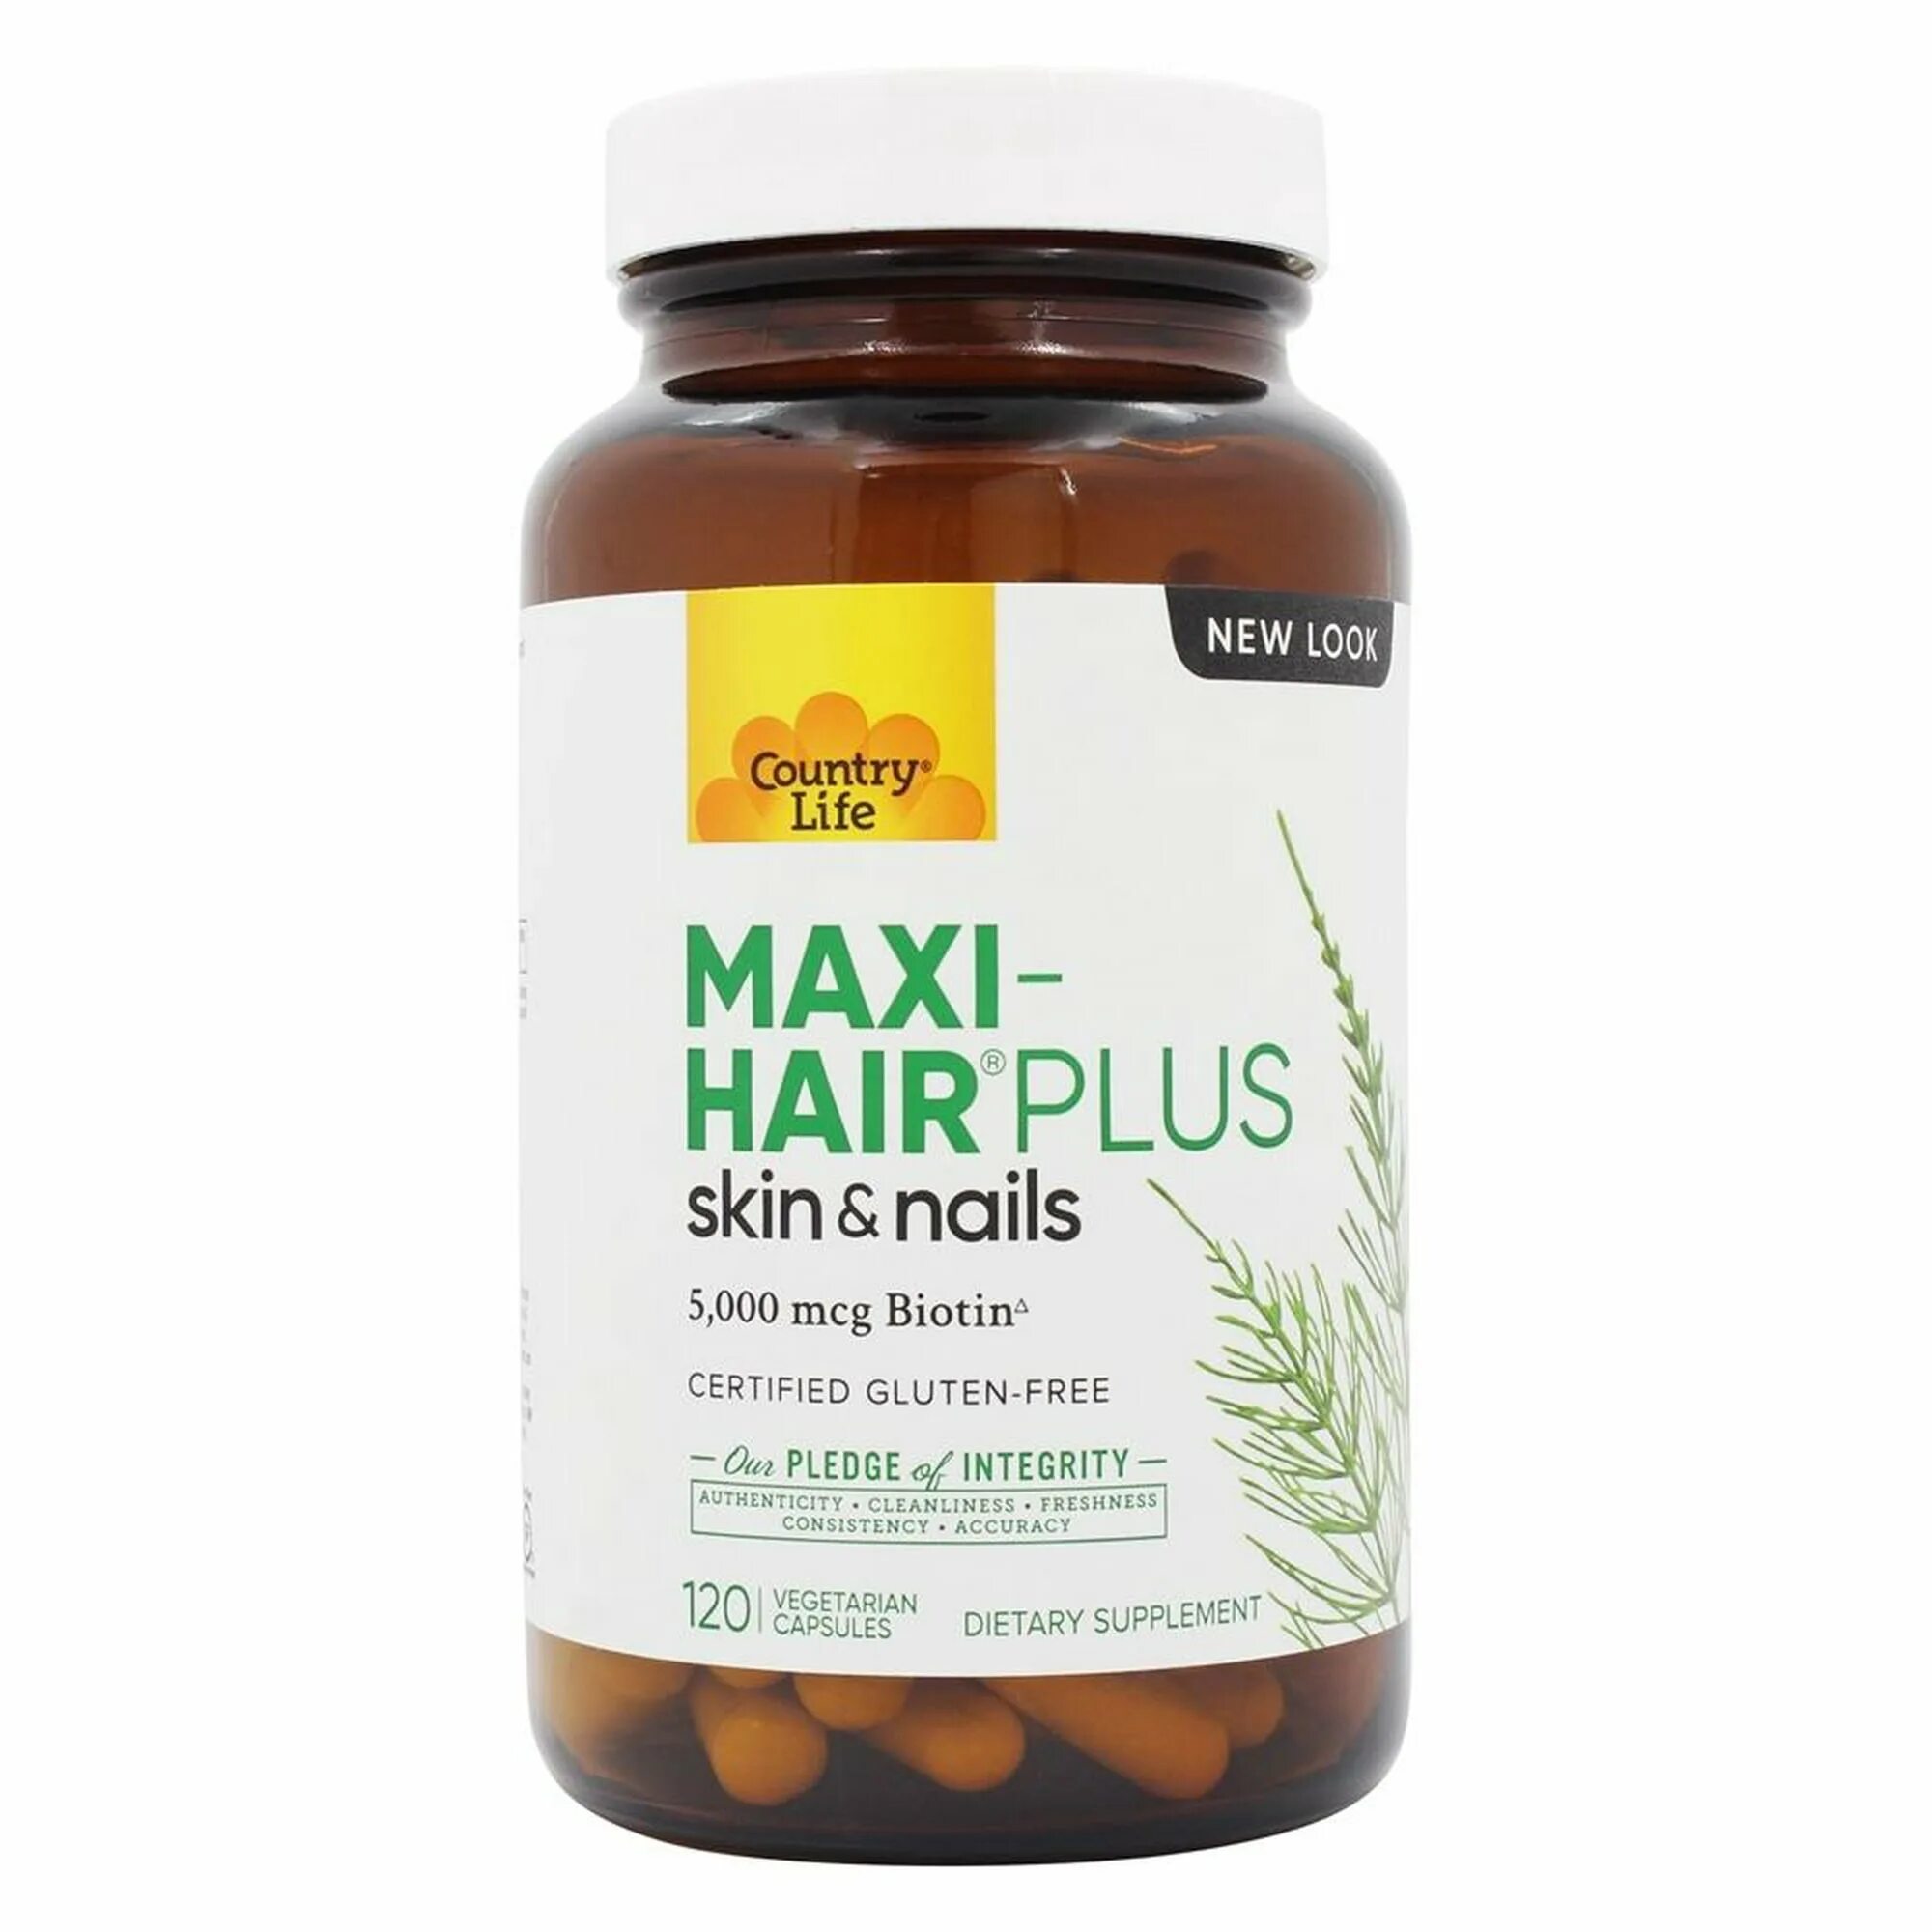 Maxi hair plus. Country Life Maxi hair. Maxi hair Skin Nails. Макси капсулы. Now foods кожа волосы ногти.